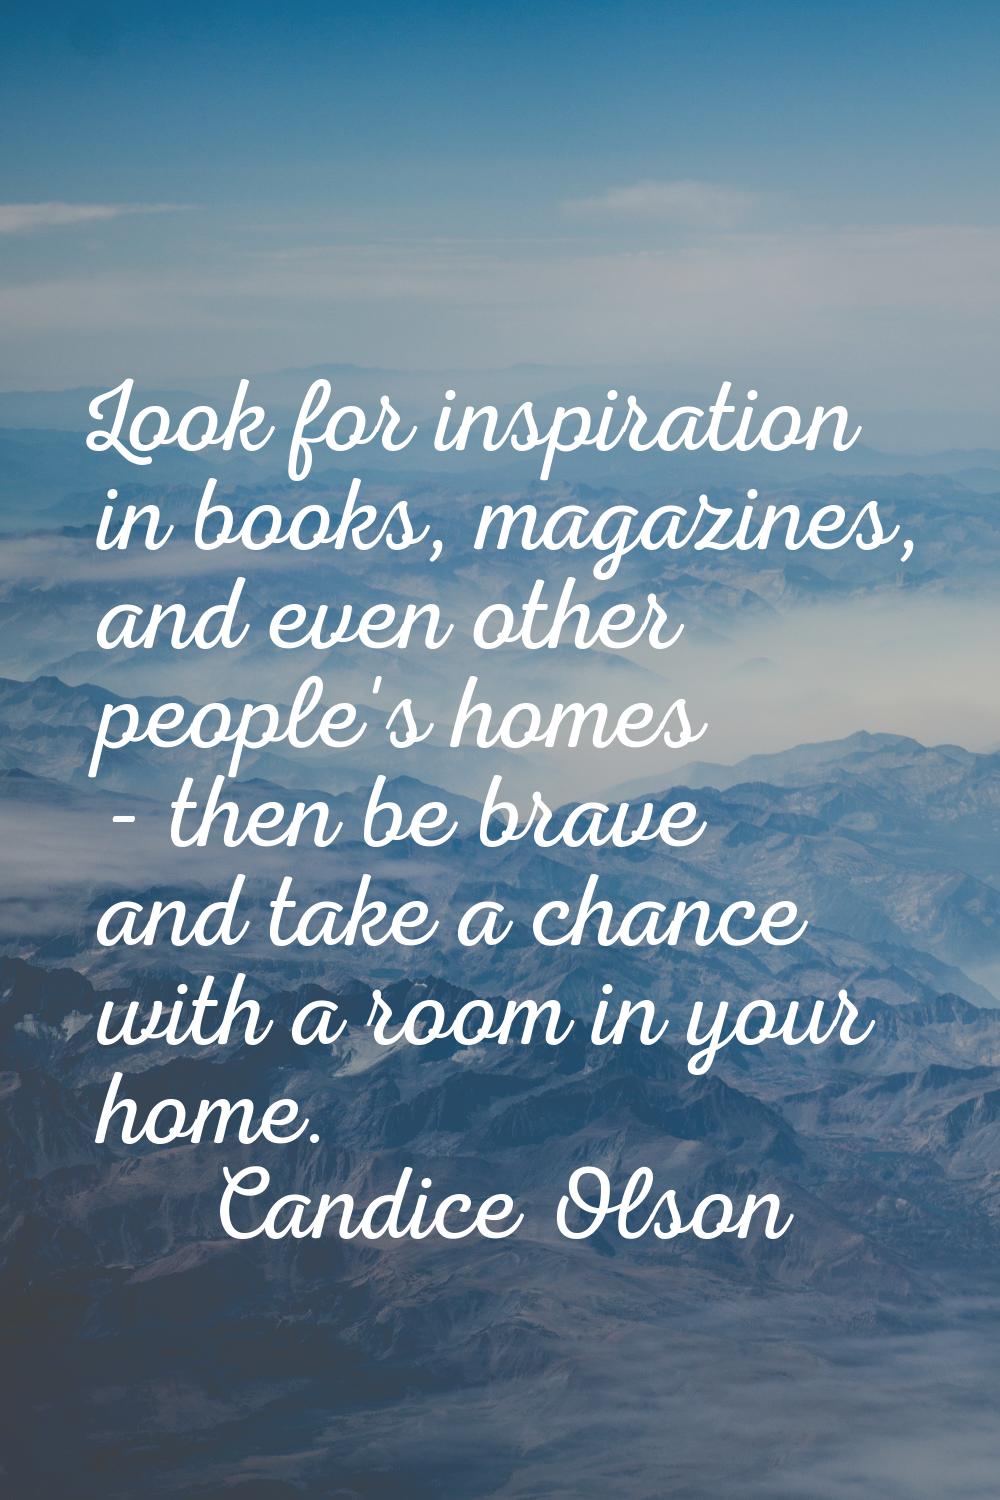 Look for inspiration in books, magazines, and even other people's homes - then be brave and take a 